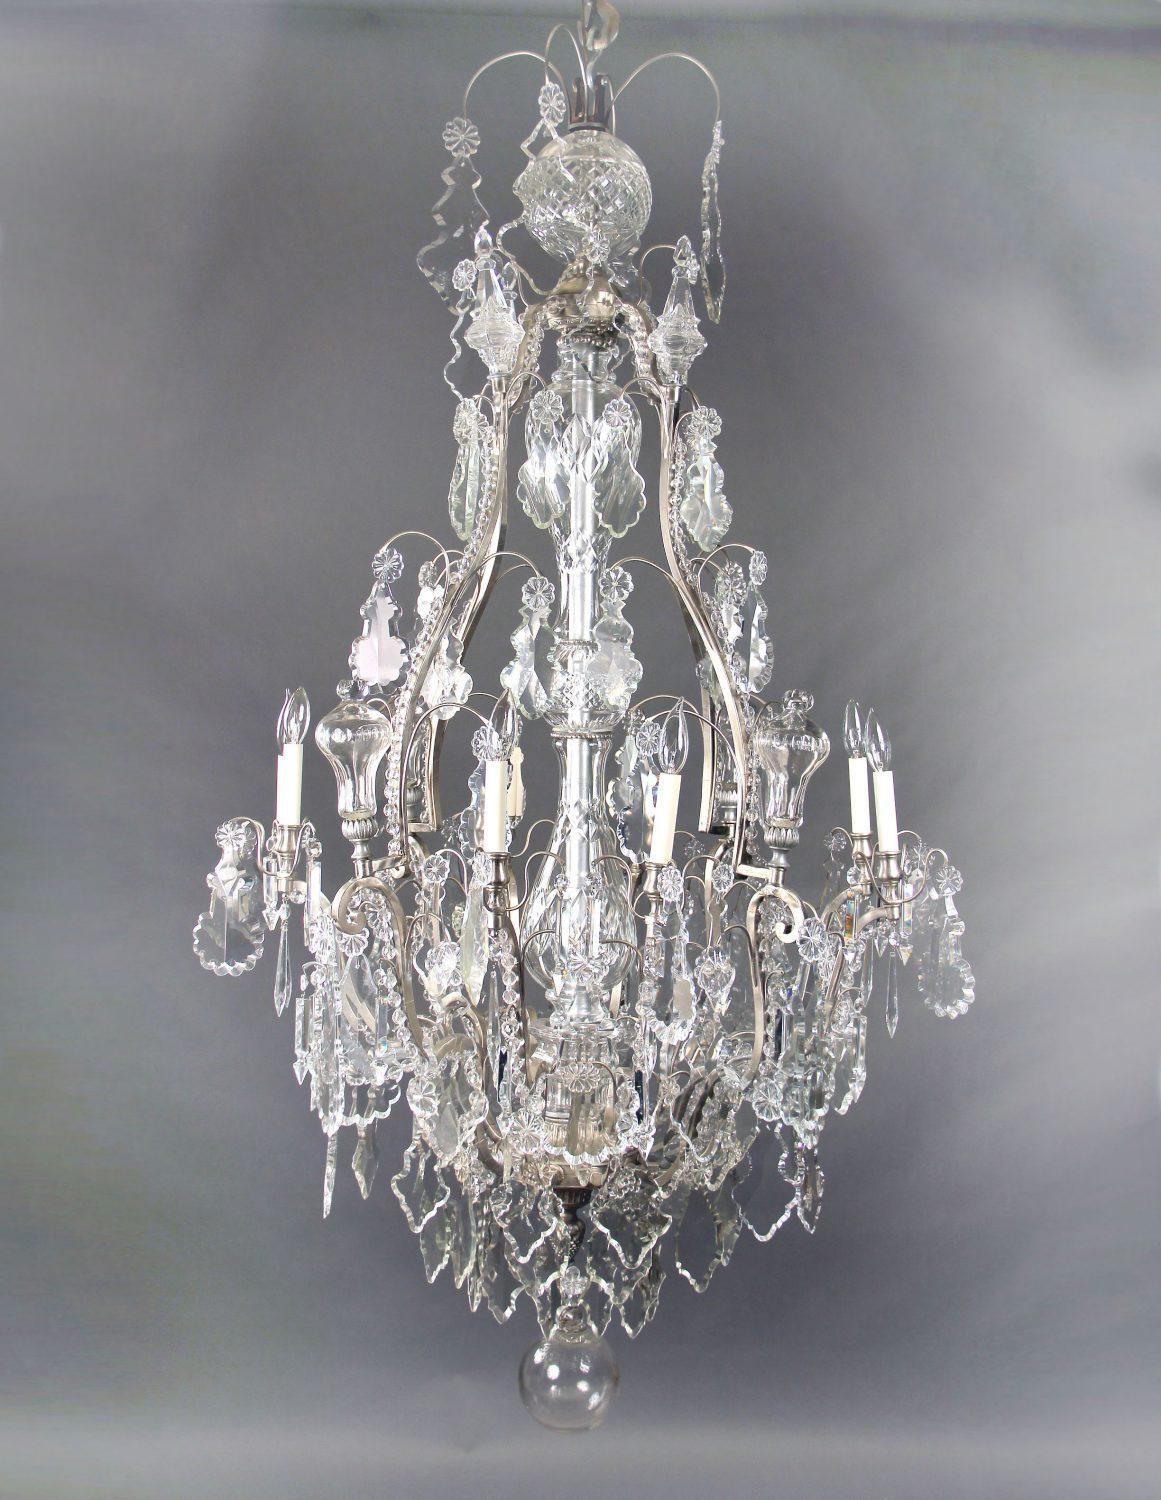 A late 19th century silvered bronze and crystal eight light chandelier

multifaceted and shaped crystal, beaded arms, cut crystal central column, 8 tiered spears with eight perimeter lights.